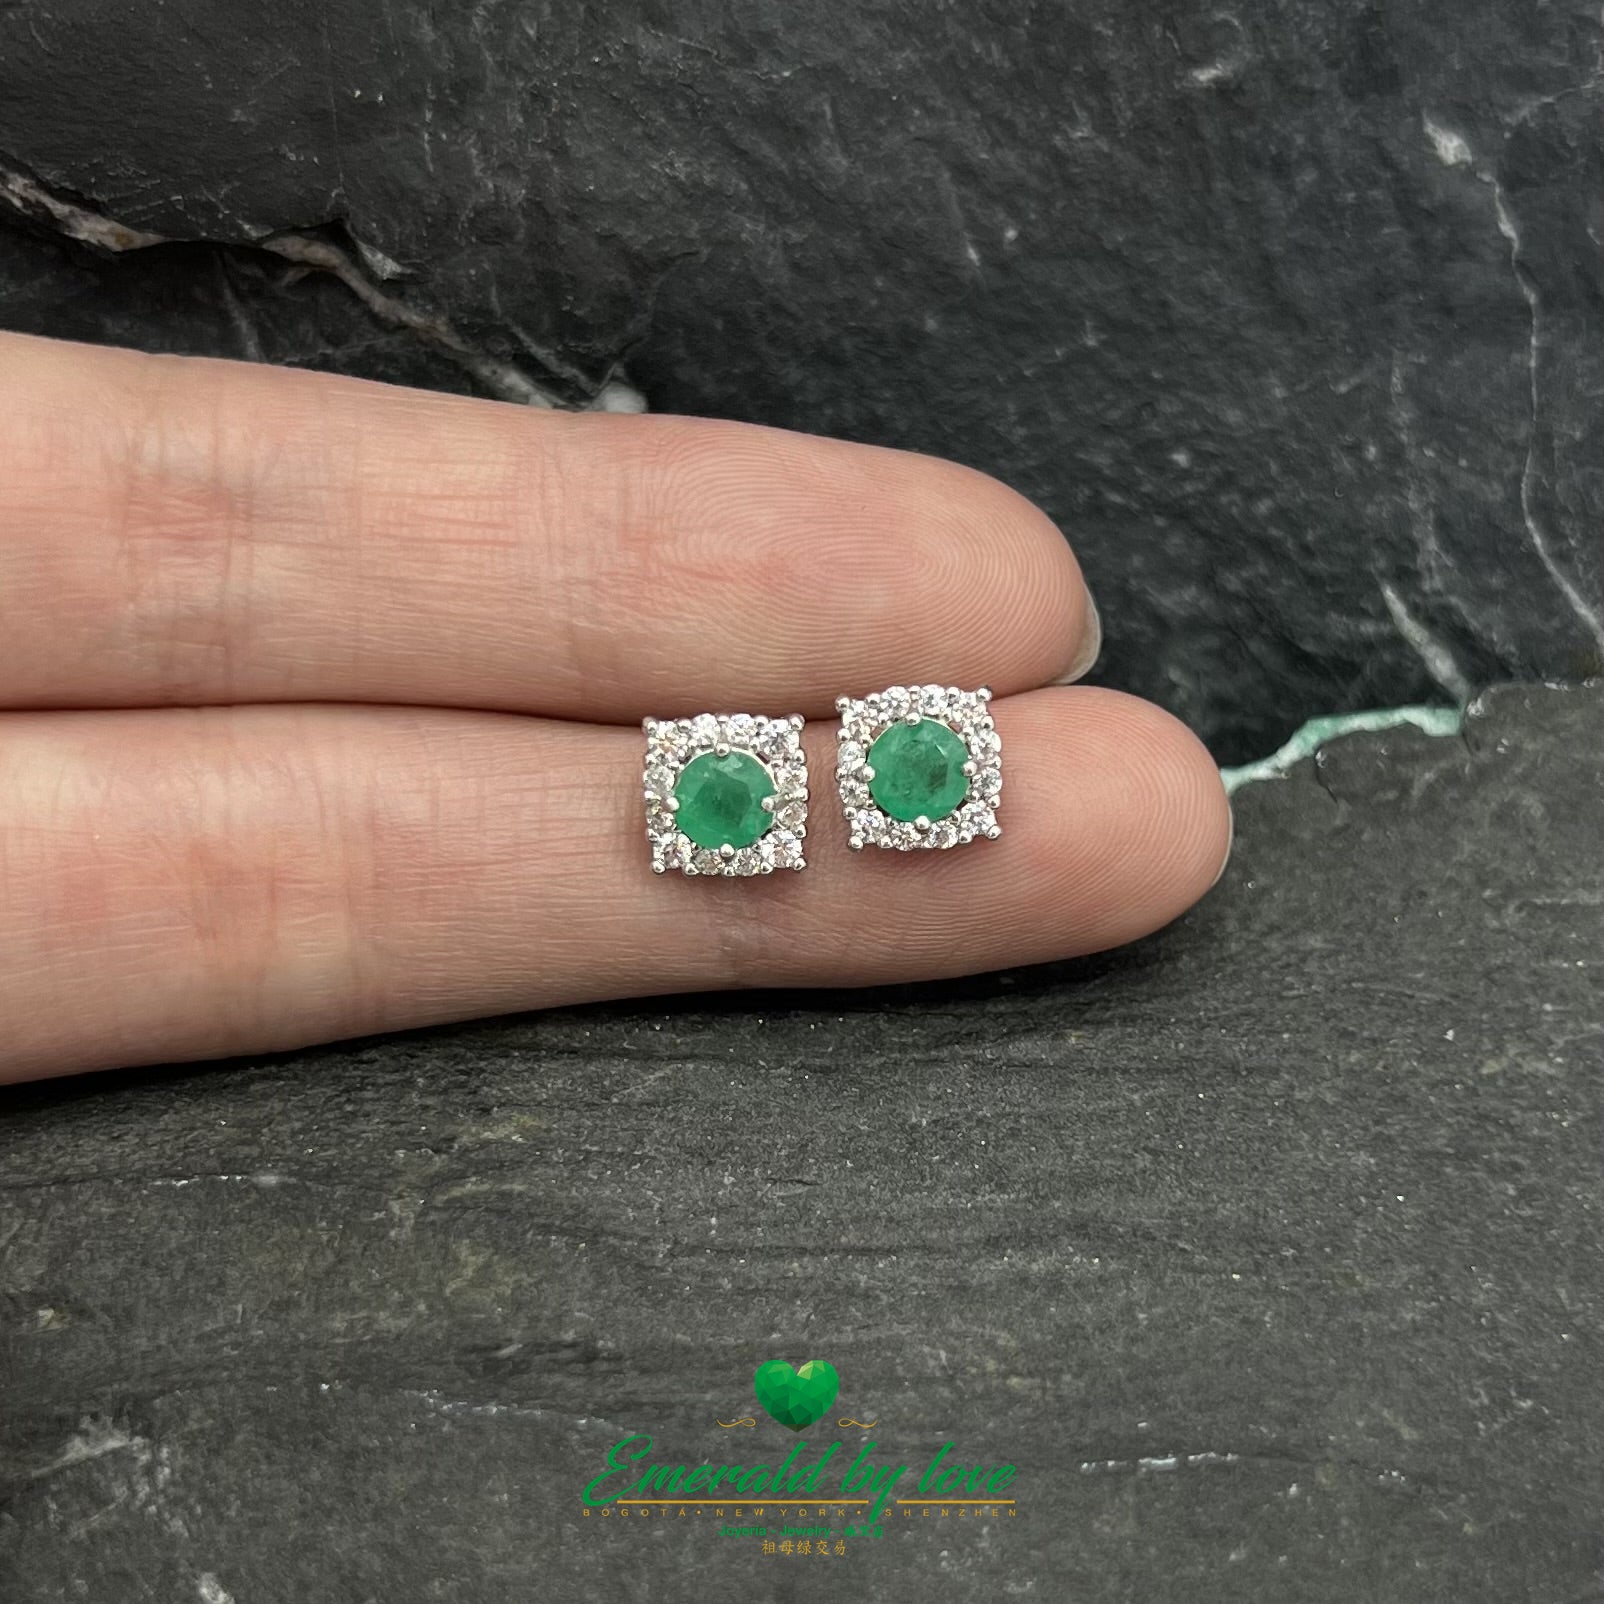 Square Sterling Silver Earrings with Round Central Emerald